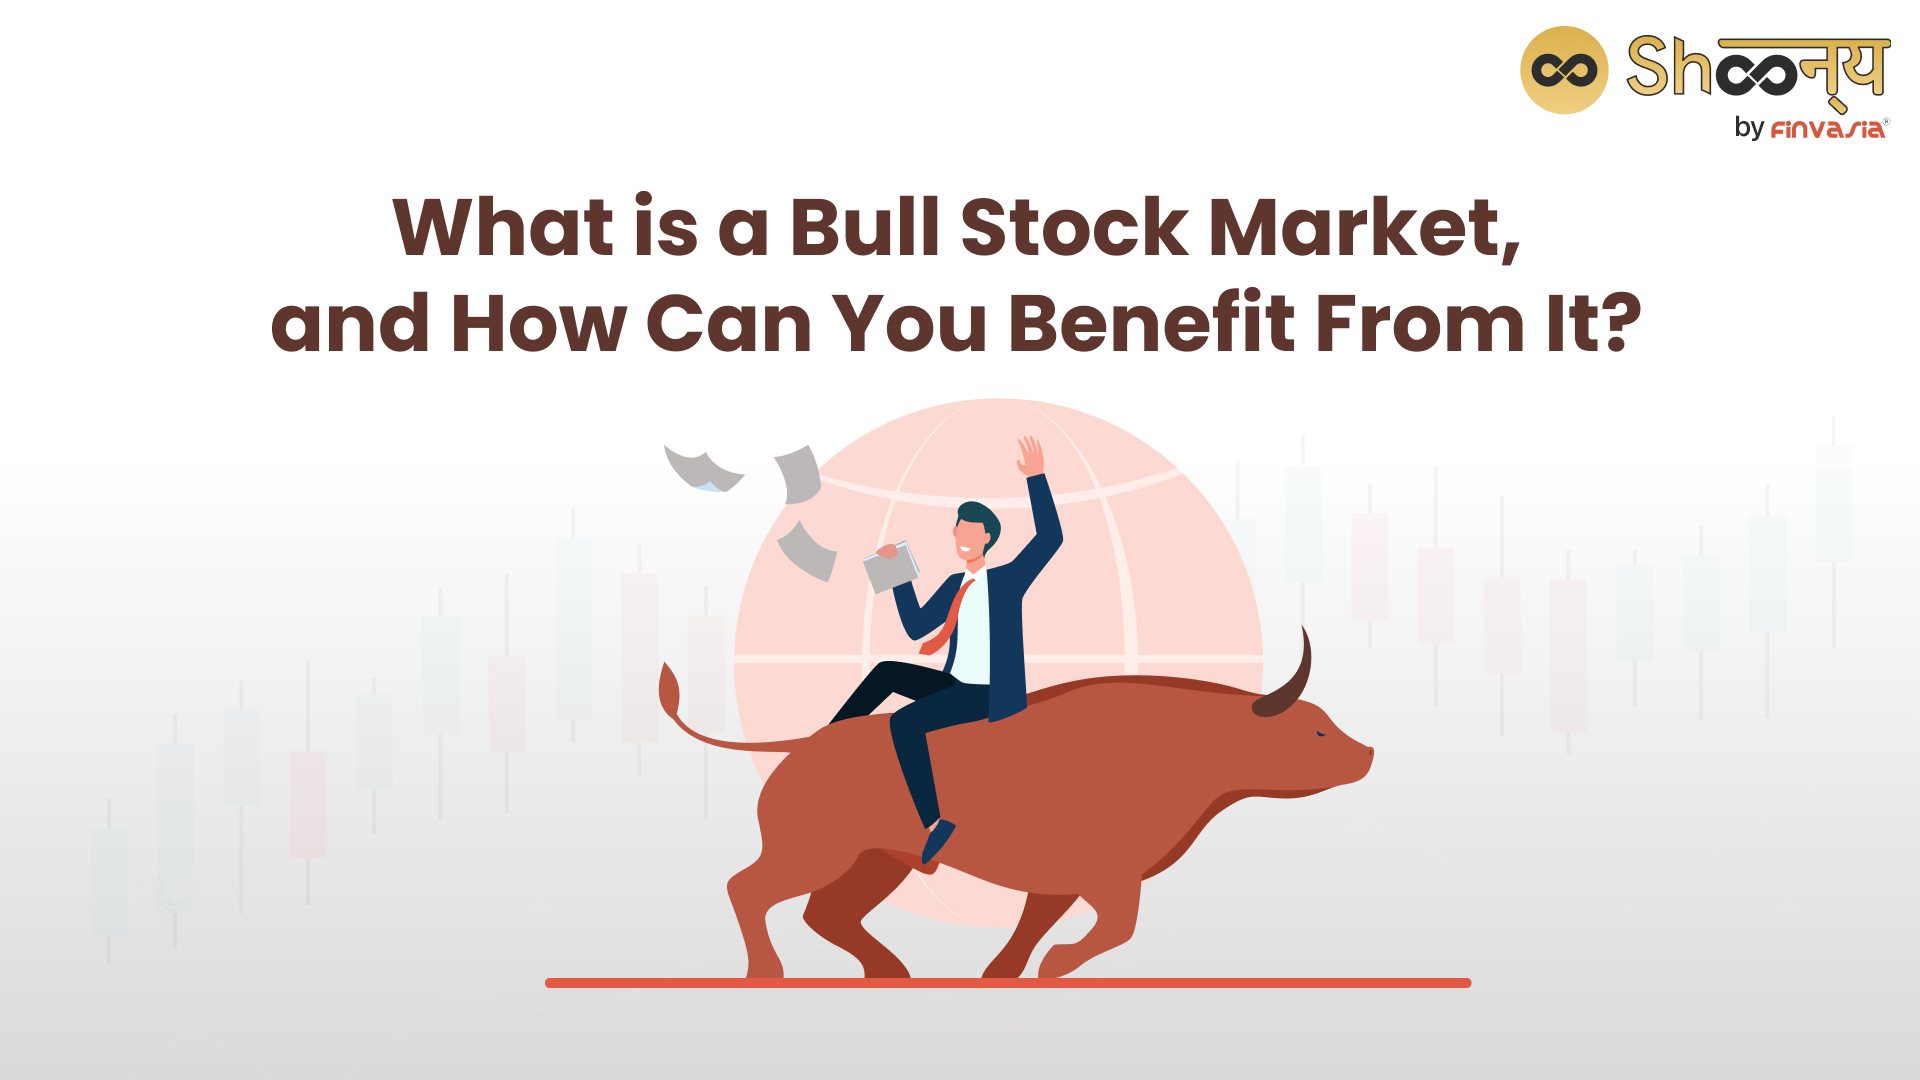 Bull Stock Market| Meaning, Advantages and Disadvantages